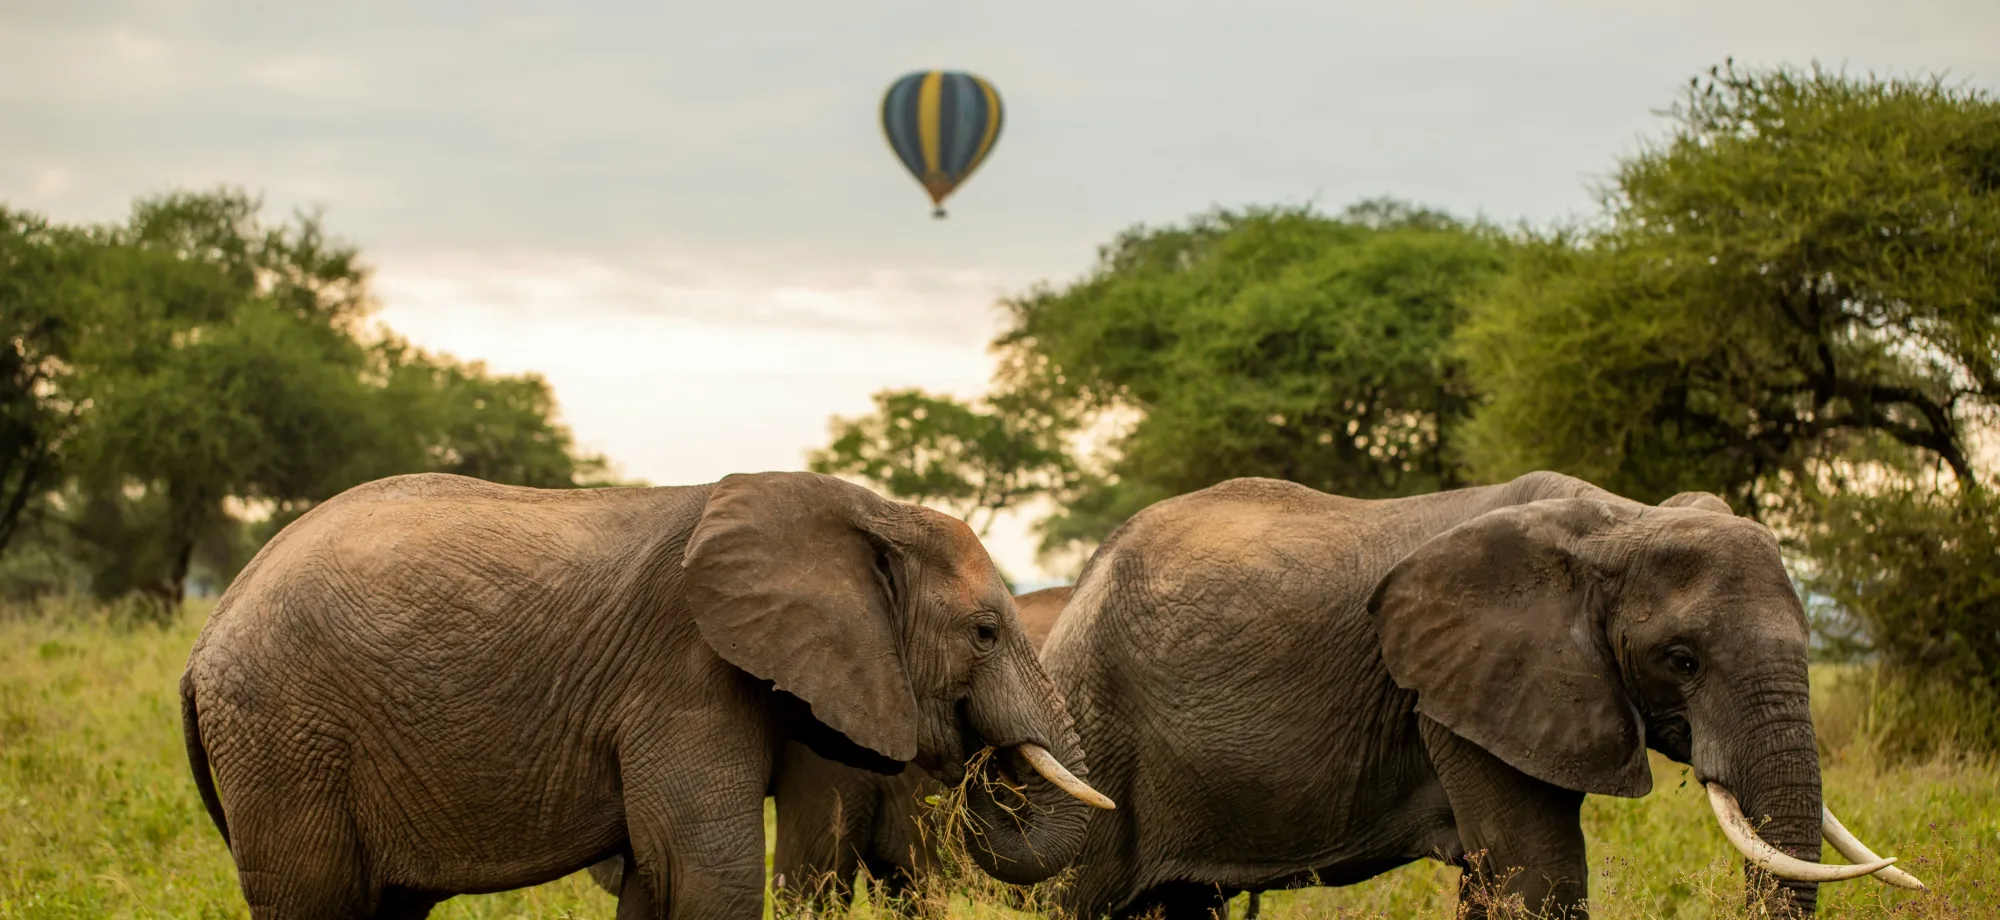 Two elephants stand beside each other as a hot air ballooon floats above.